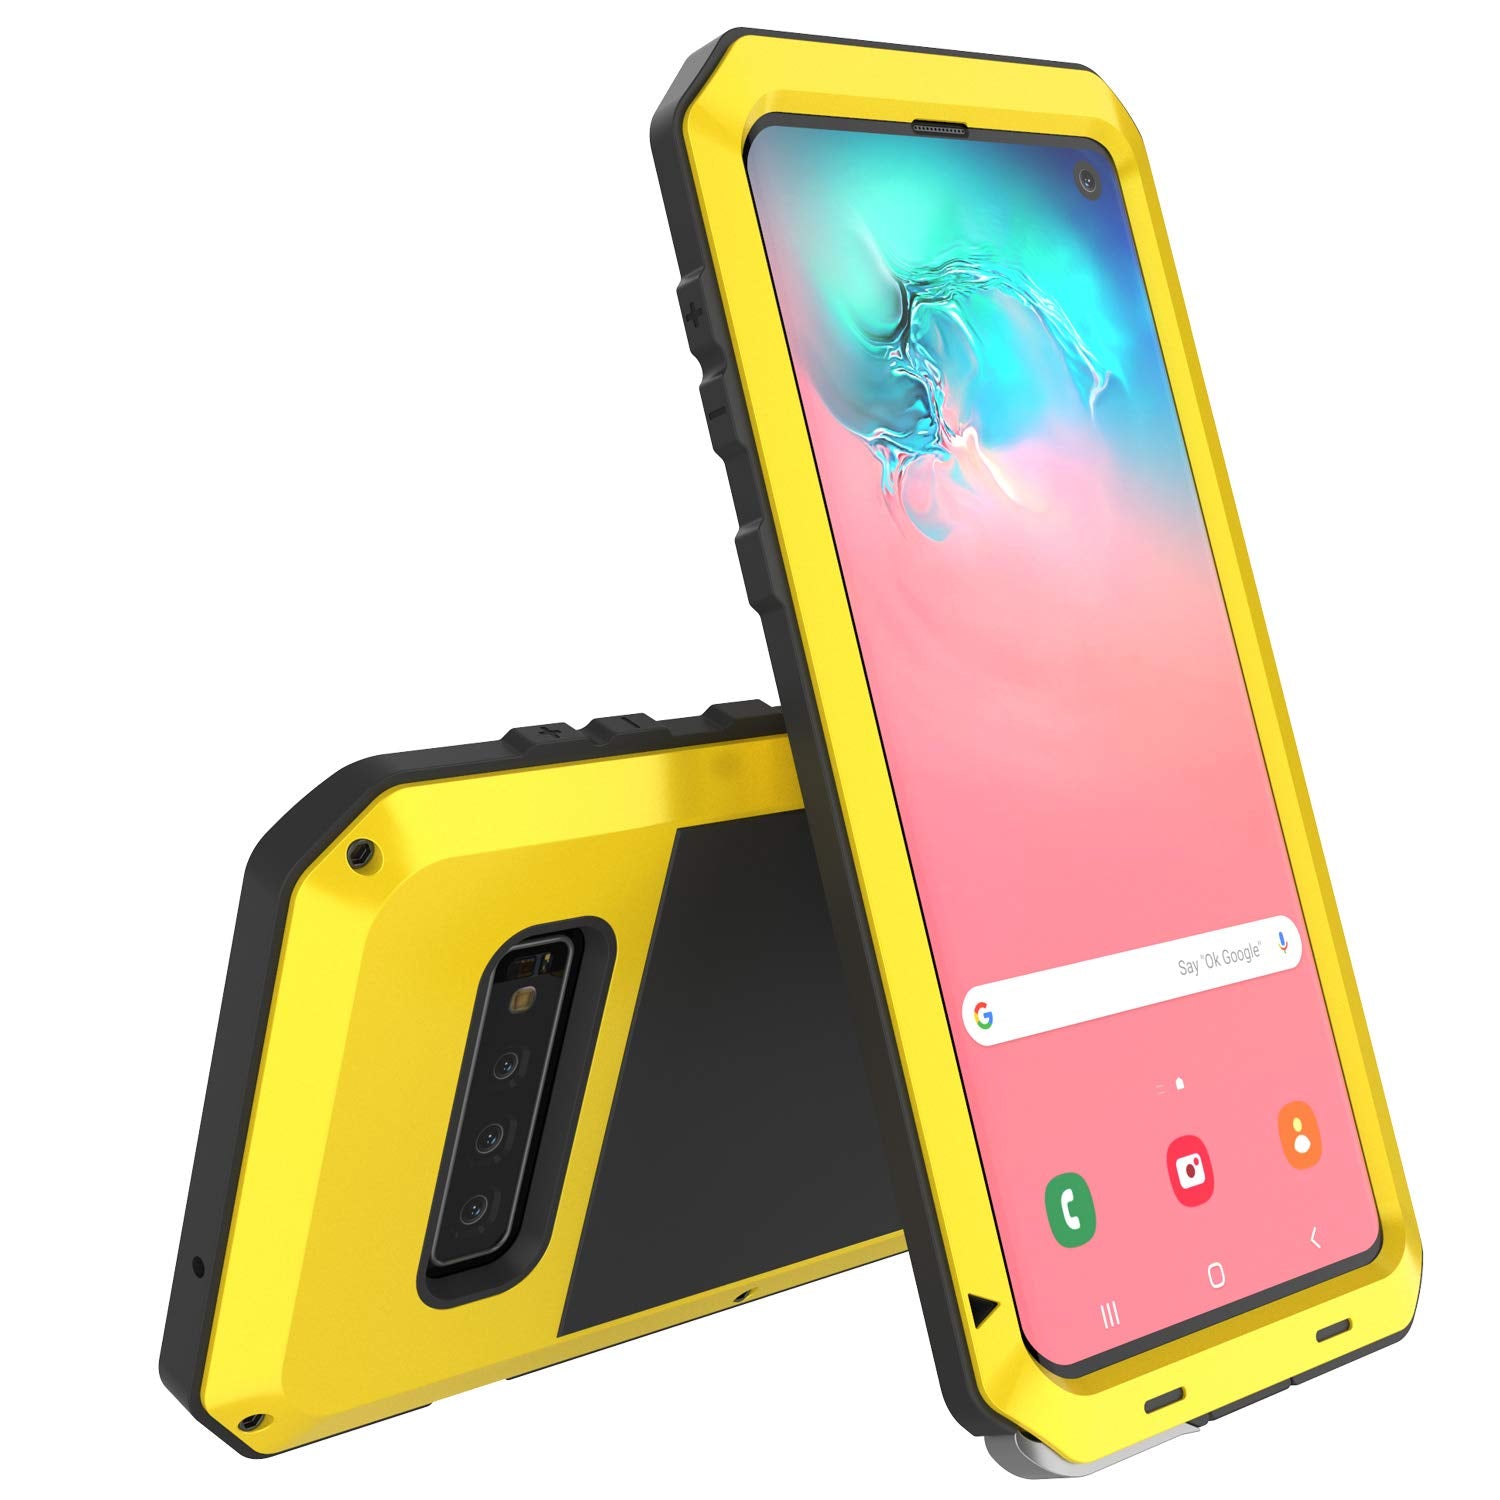 Galaxy S10 Metal Case, Heavy Duty Military Grade Rugged Armor Cover [Neon]